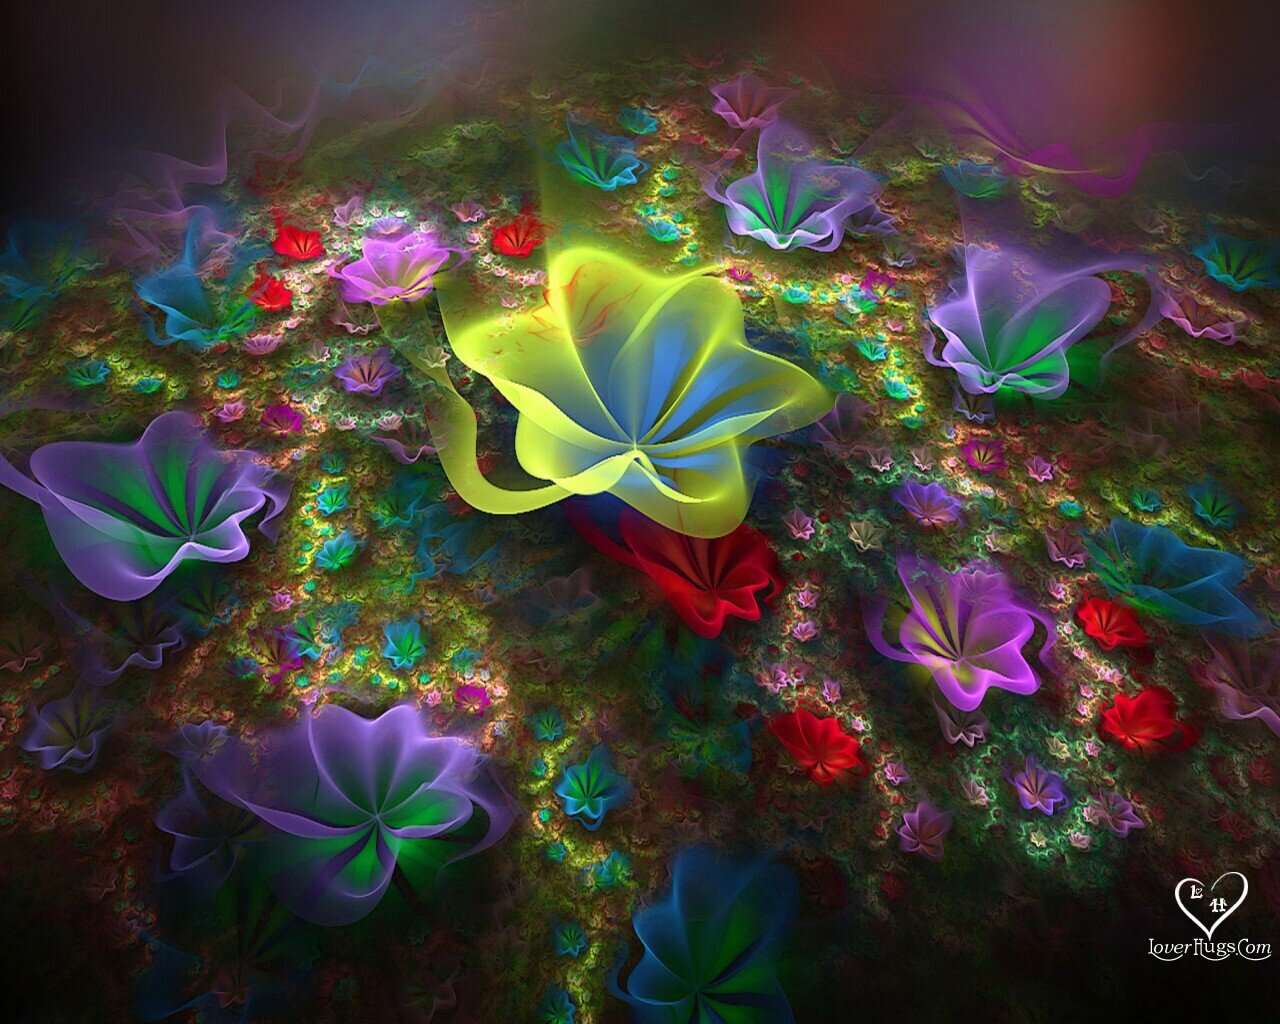 Amaging World 3D Flowers Wallpapers 1280x1024